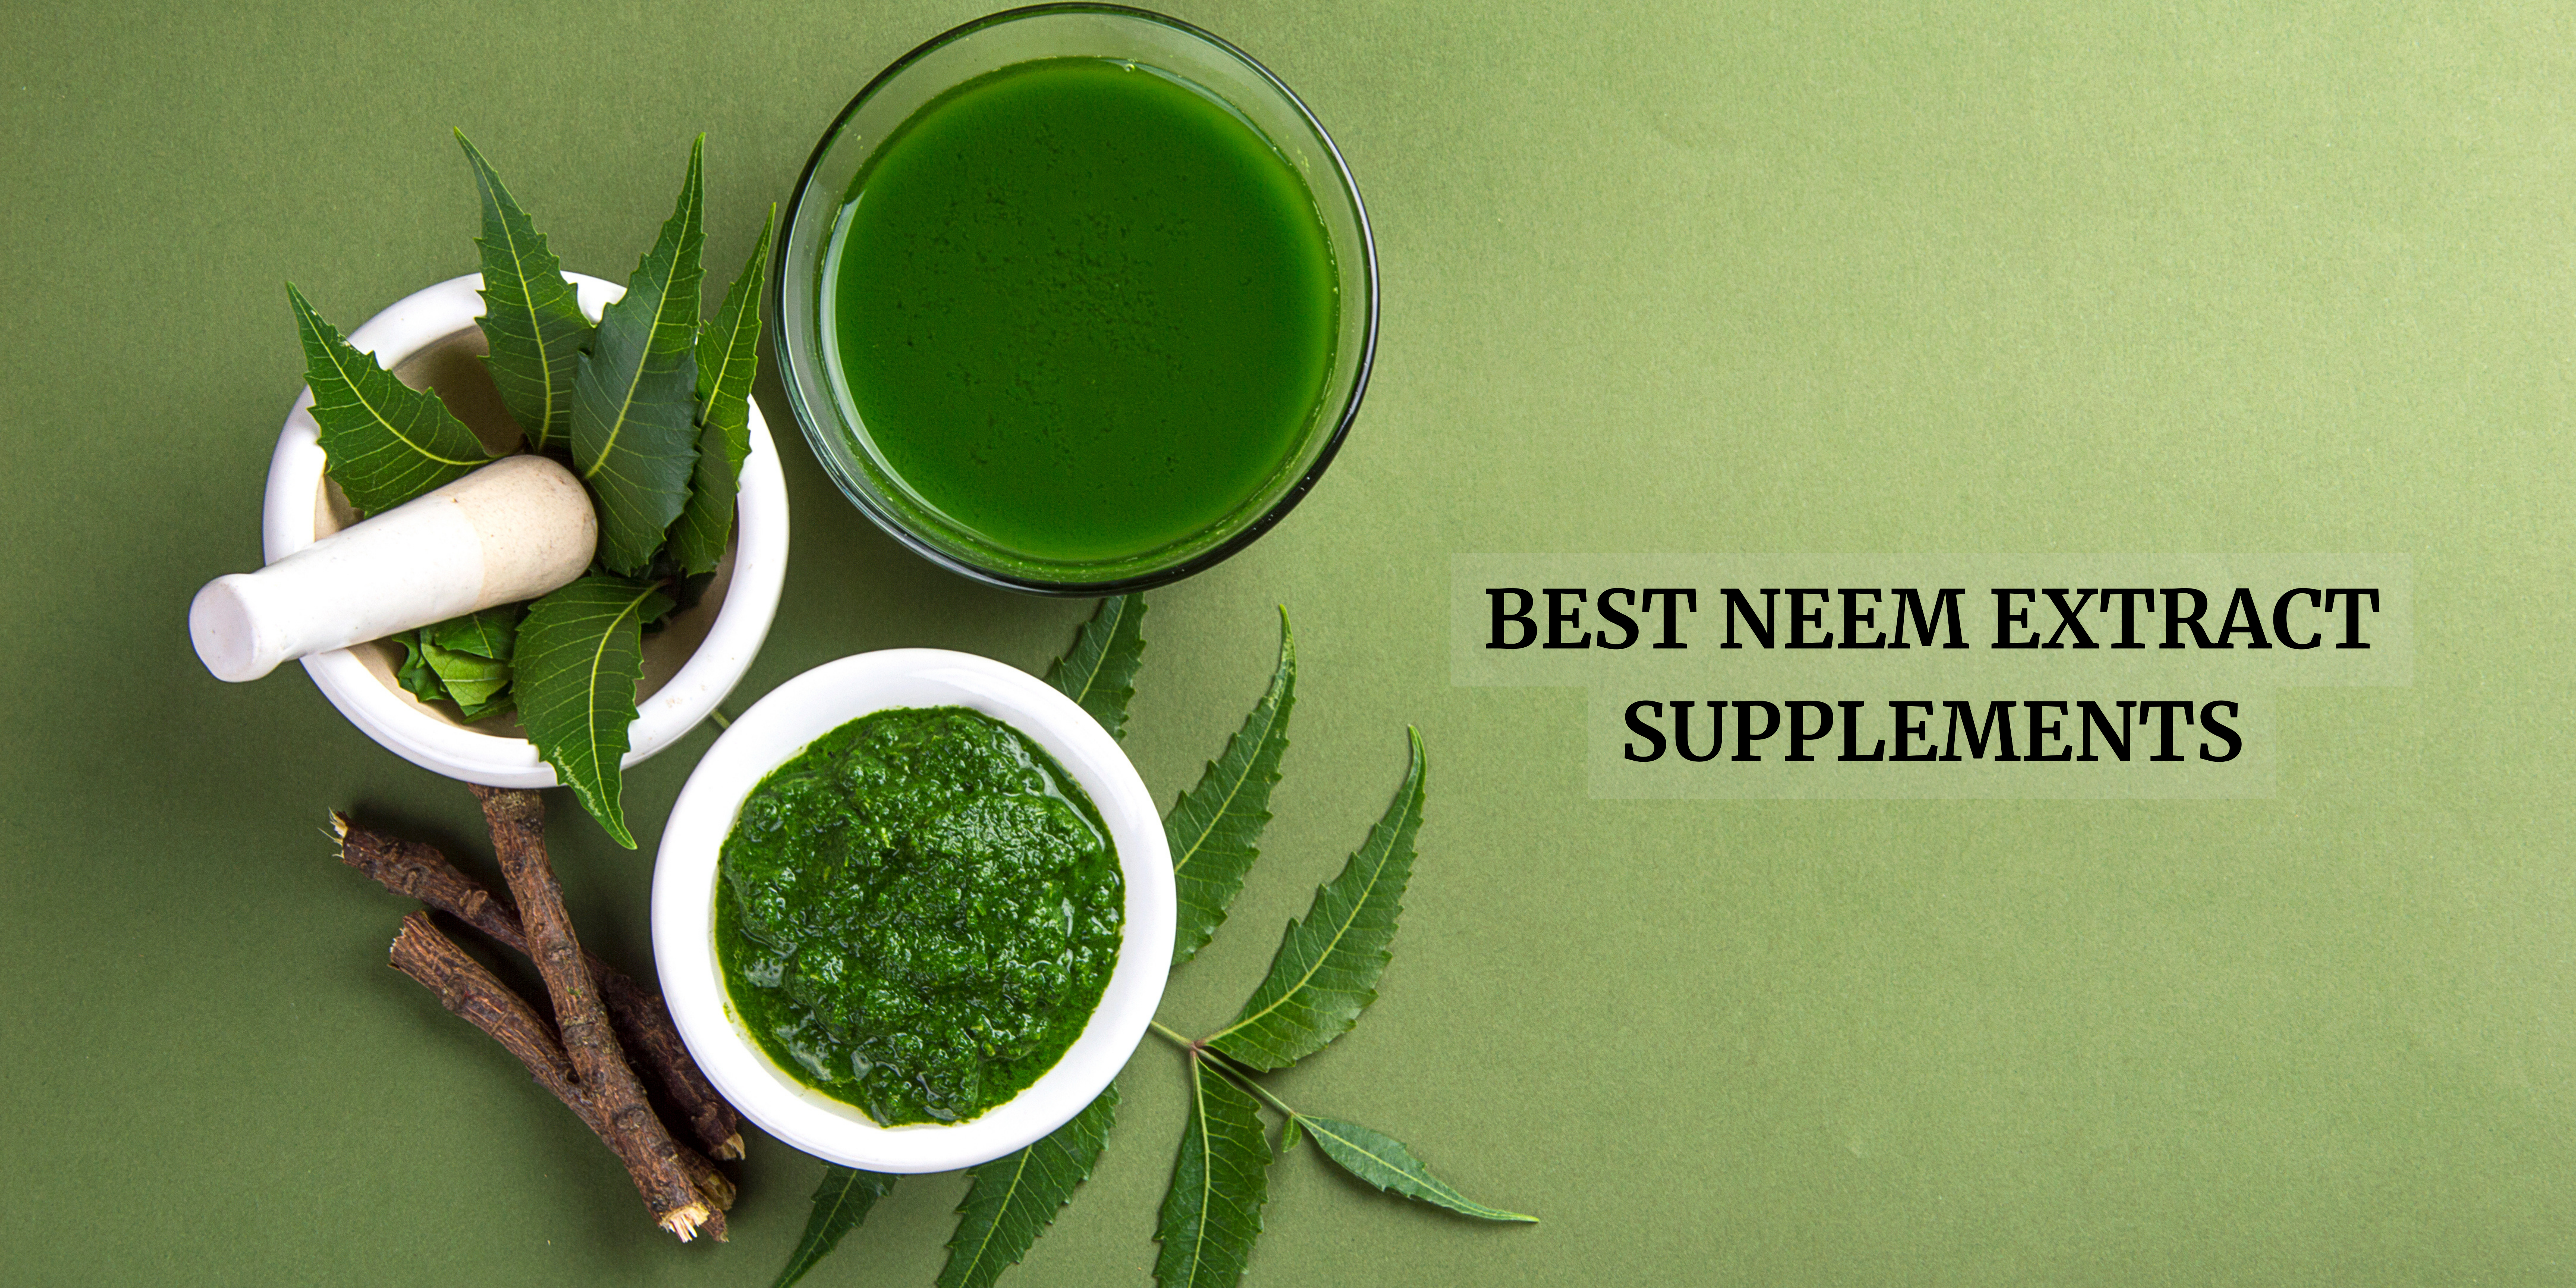 neem extract supplements in Italy